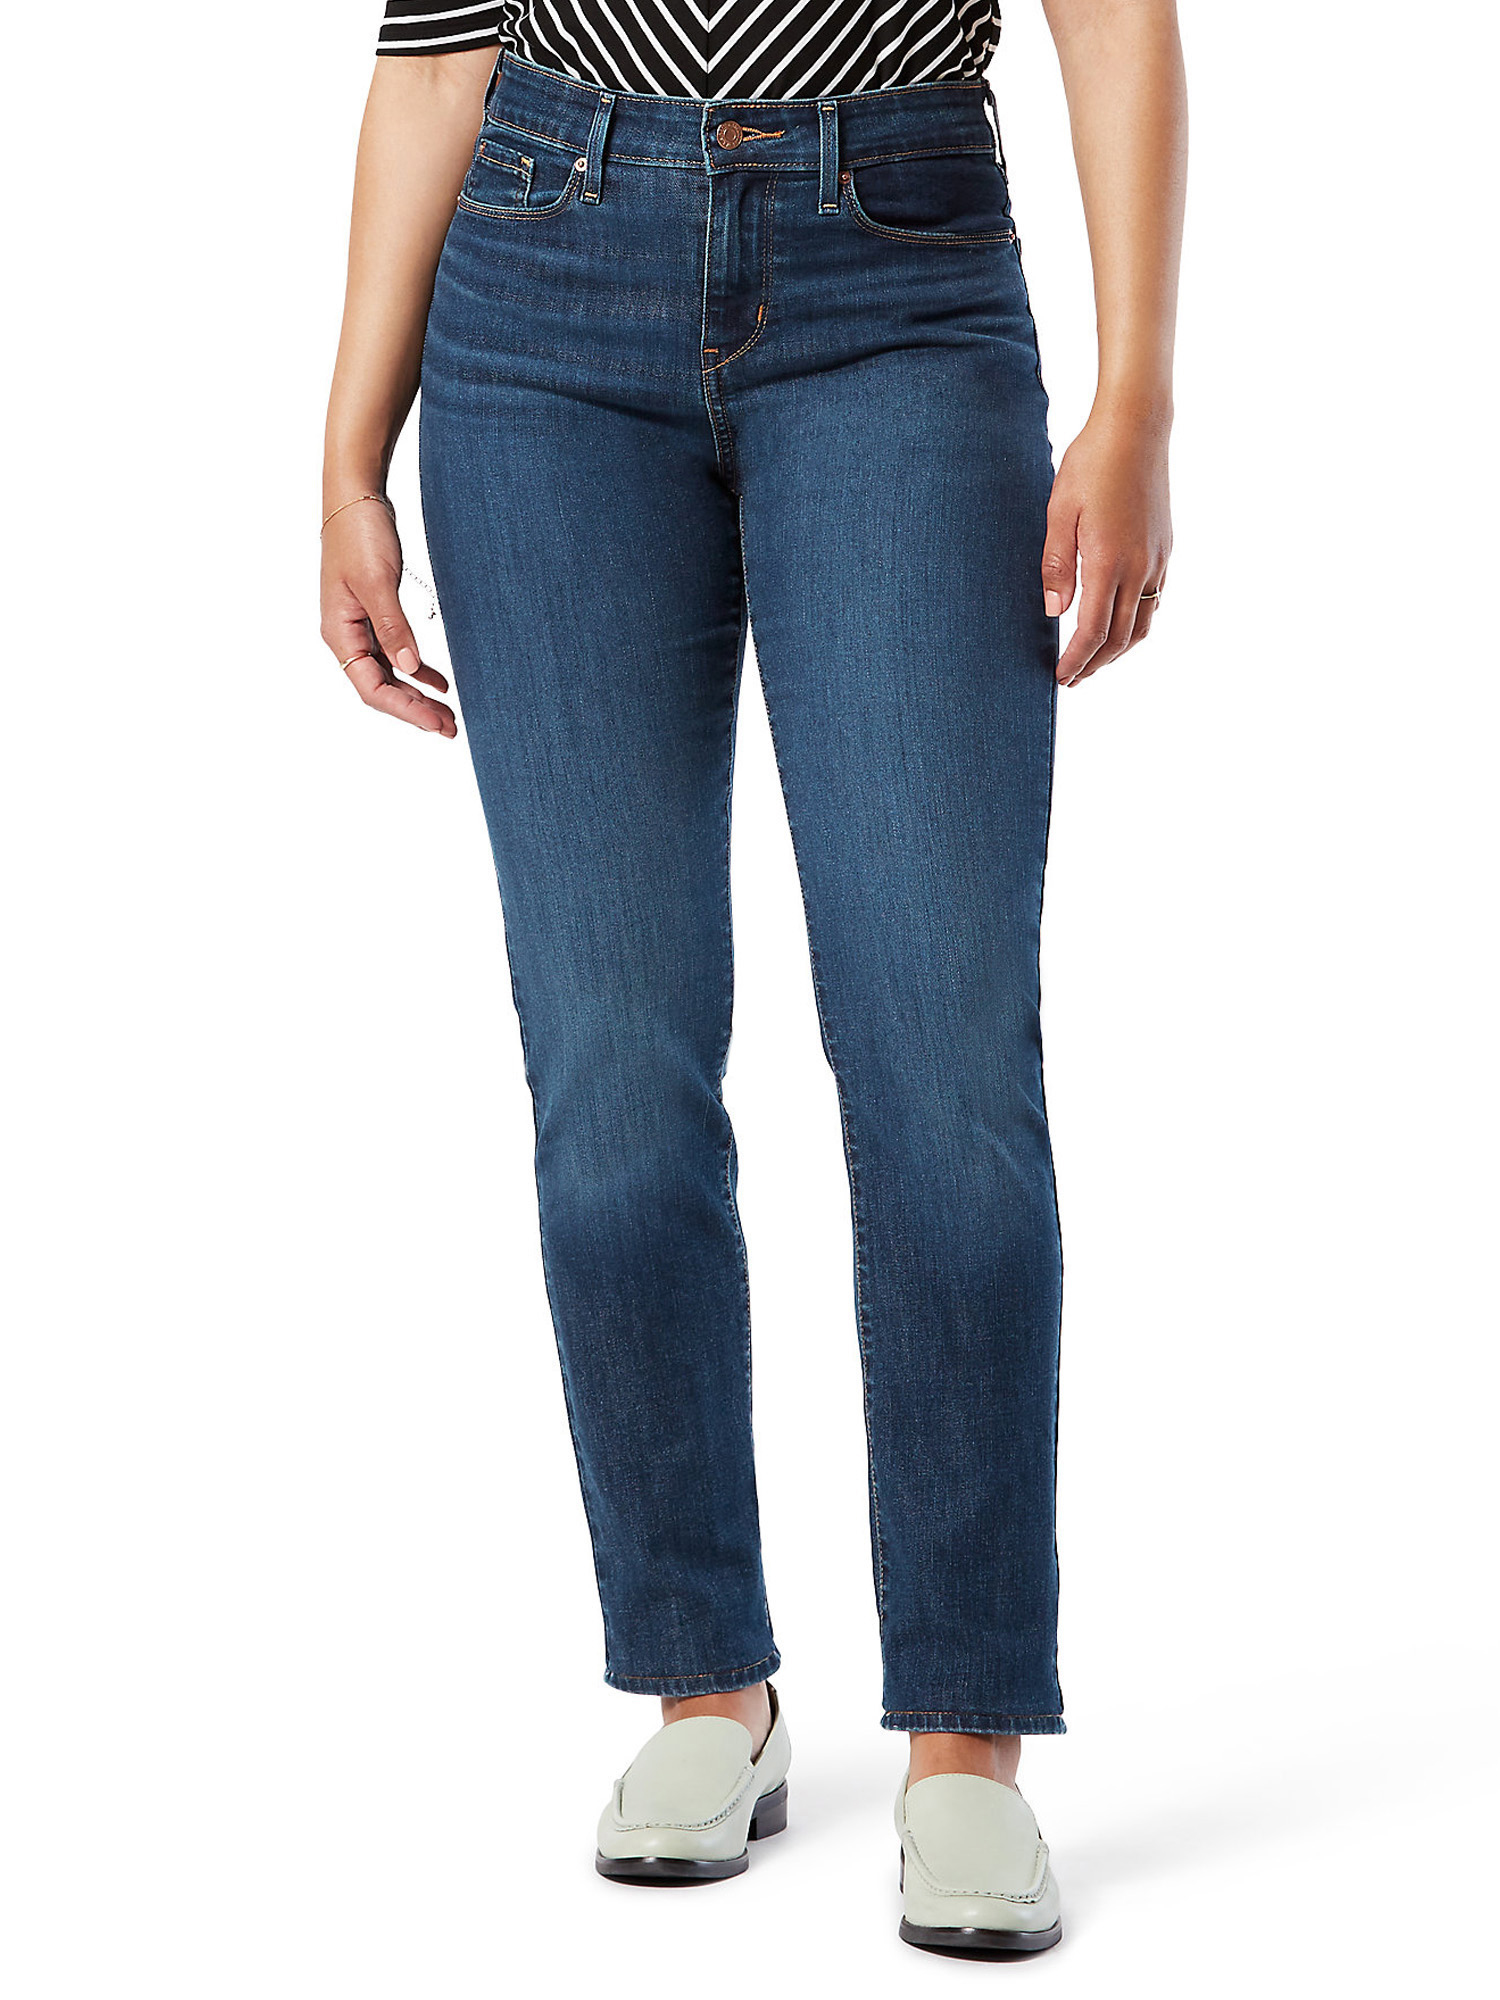 Signature by Levi Strauss & Co. Women's and Women's Plus Size Mid Rise Modern Straight Jeans, Sizes 2-28 - image 1 of 8